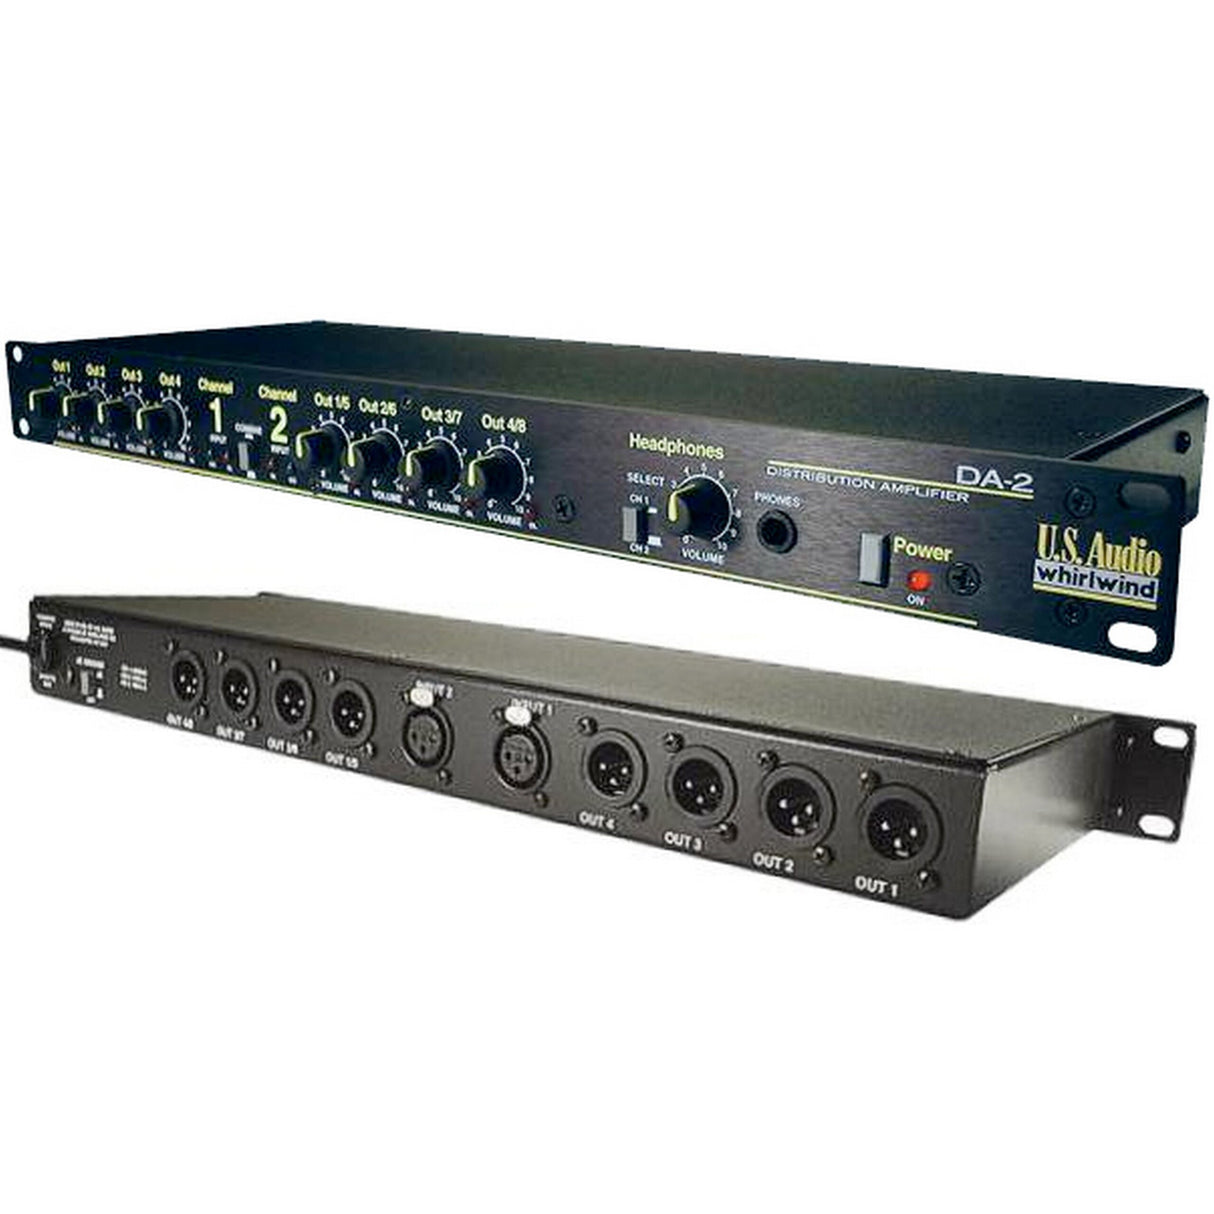 Whirlwind DA-2 Line-Level Inputs/Outputs Audio Distribution Amplifier